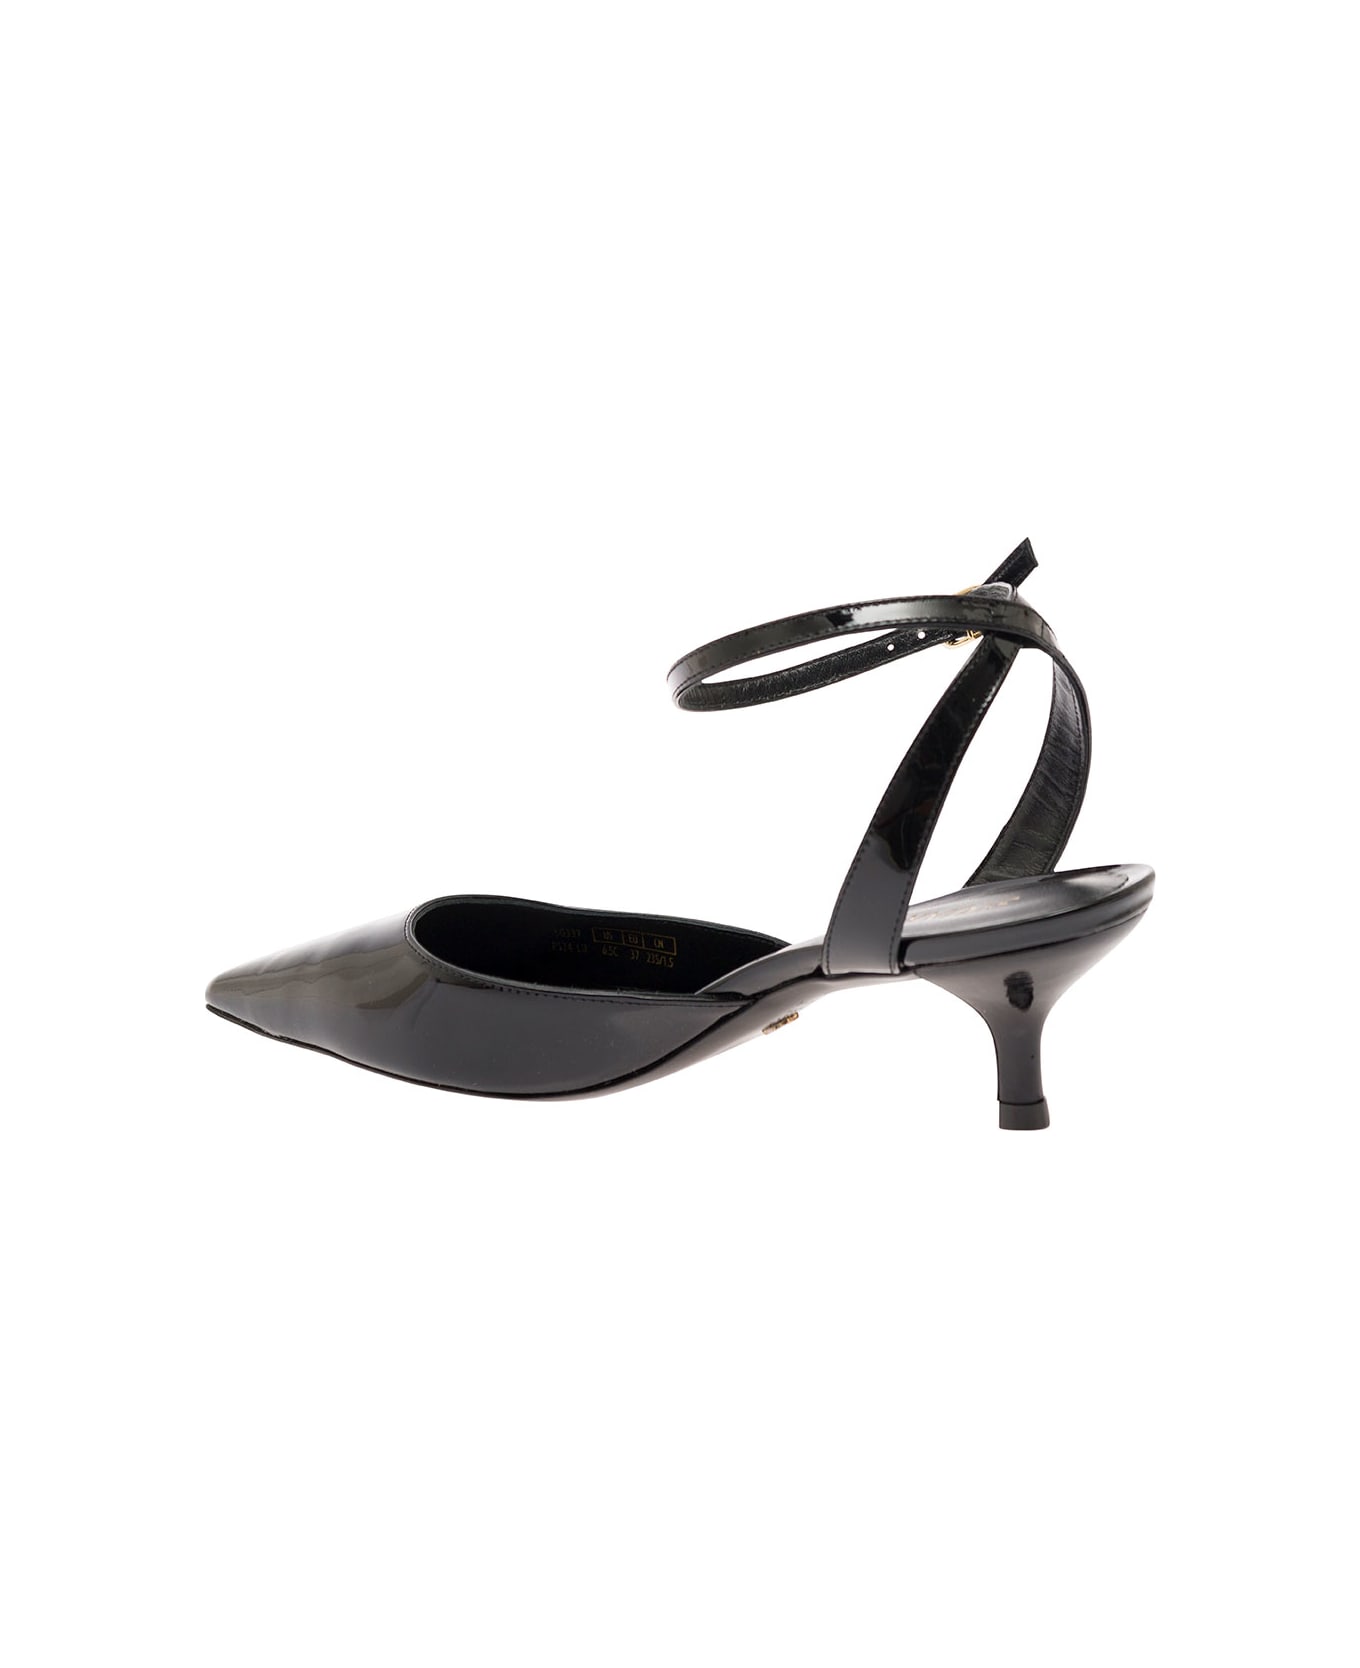 Stuart Weitzman 'barelythere' Black Pumps With Ankle Strap In Patent Leather Woman - Black